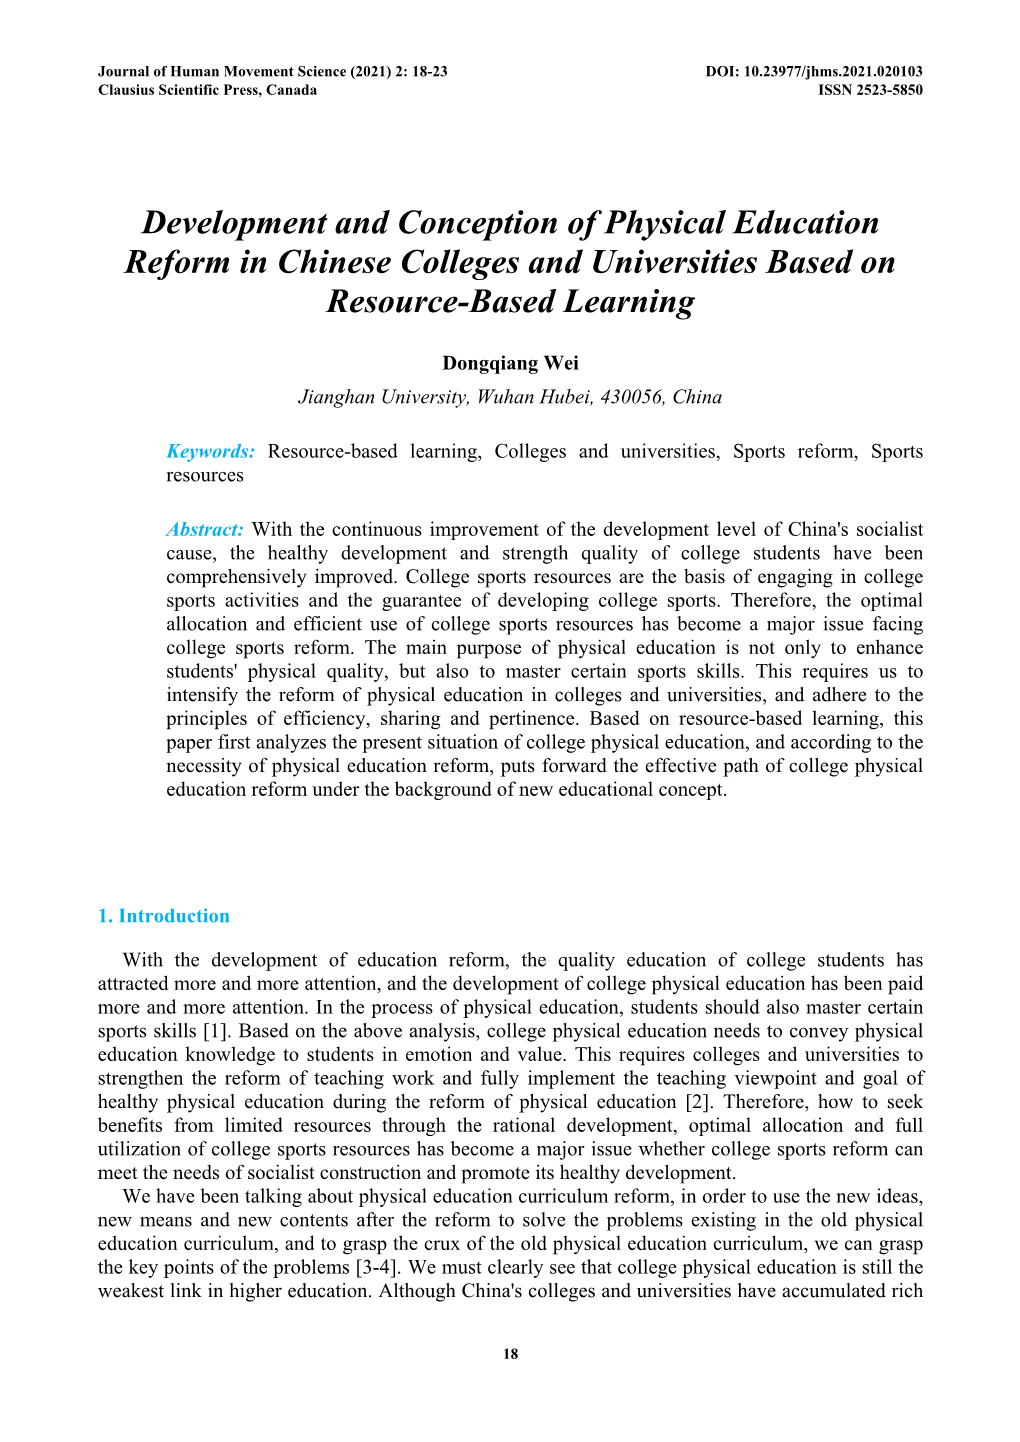 Development and Conception of Physical Education Reform in Chinese Colleges and Universities Based on Resource-Based Learning